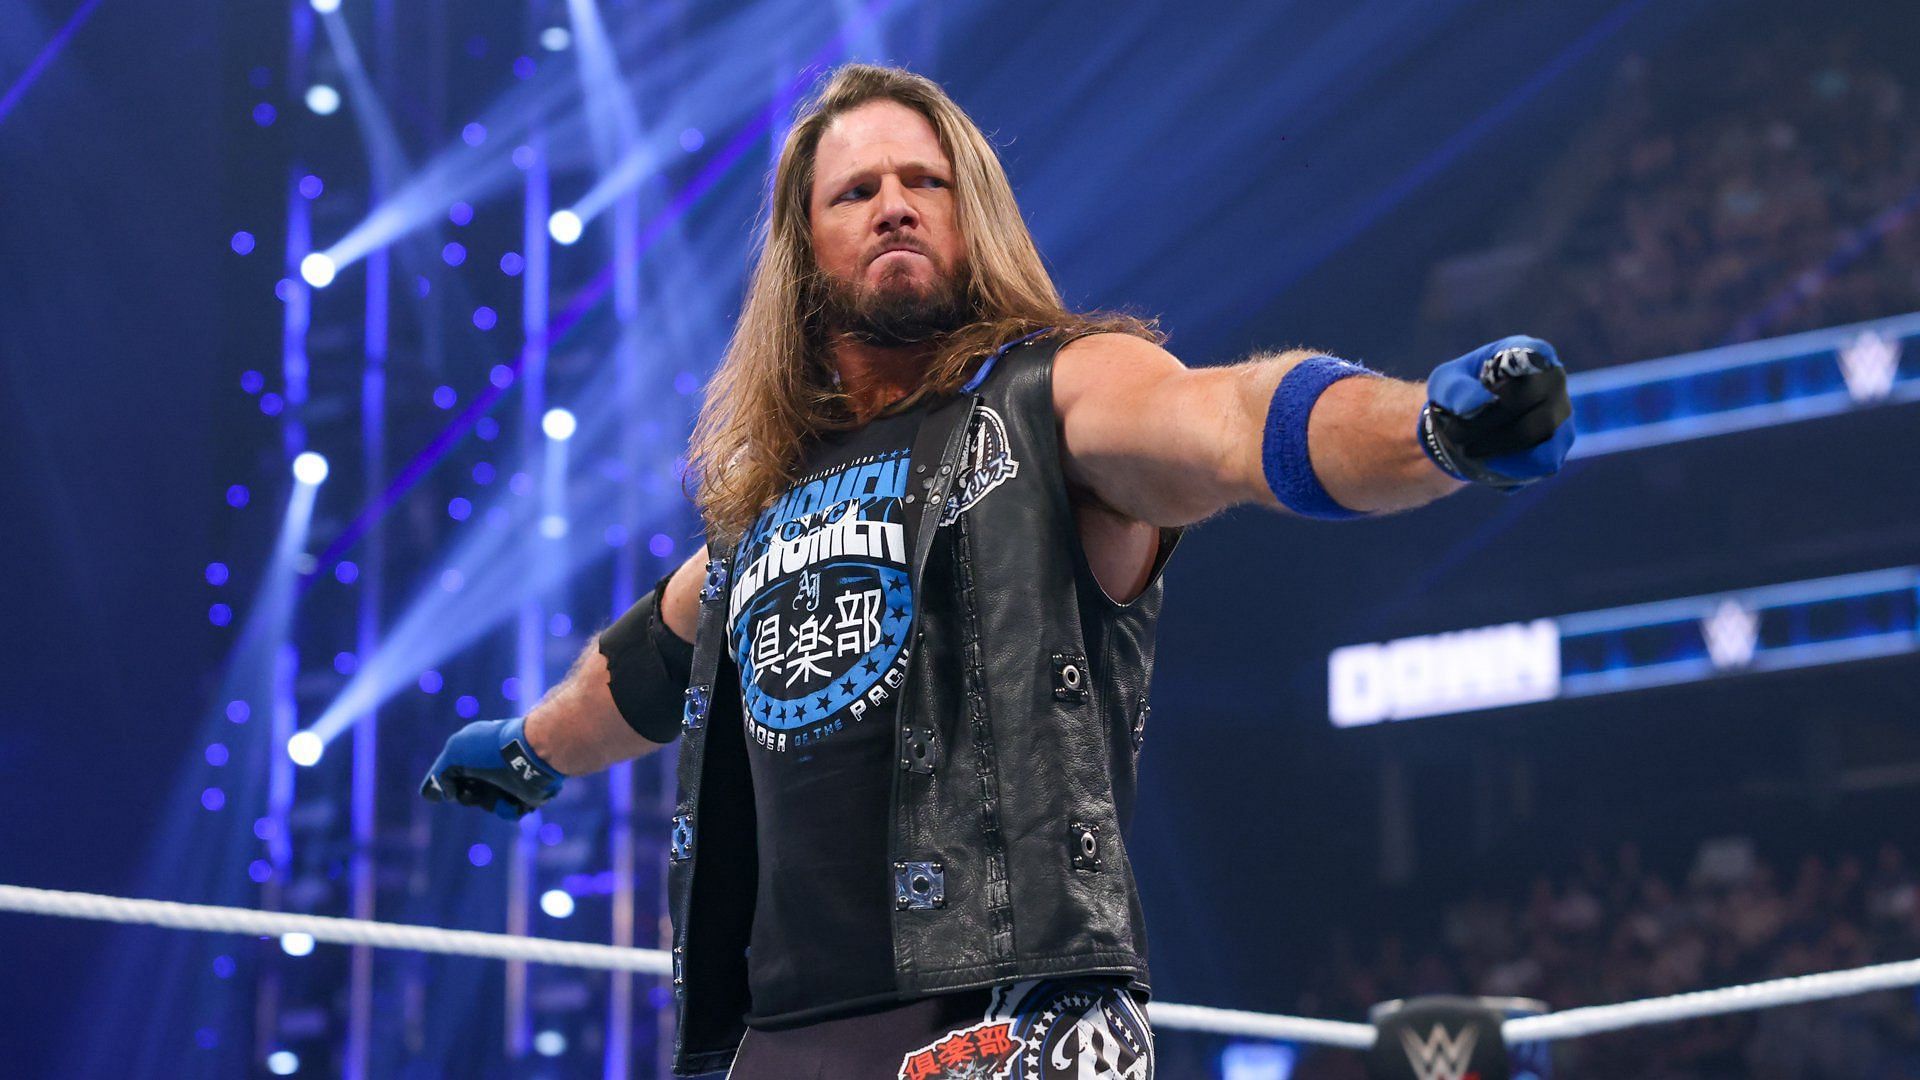 AJ Styles poses in the ring on WWE SmackDown